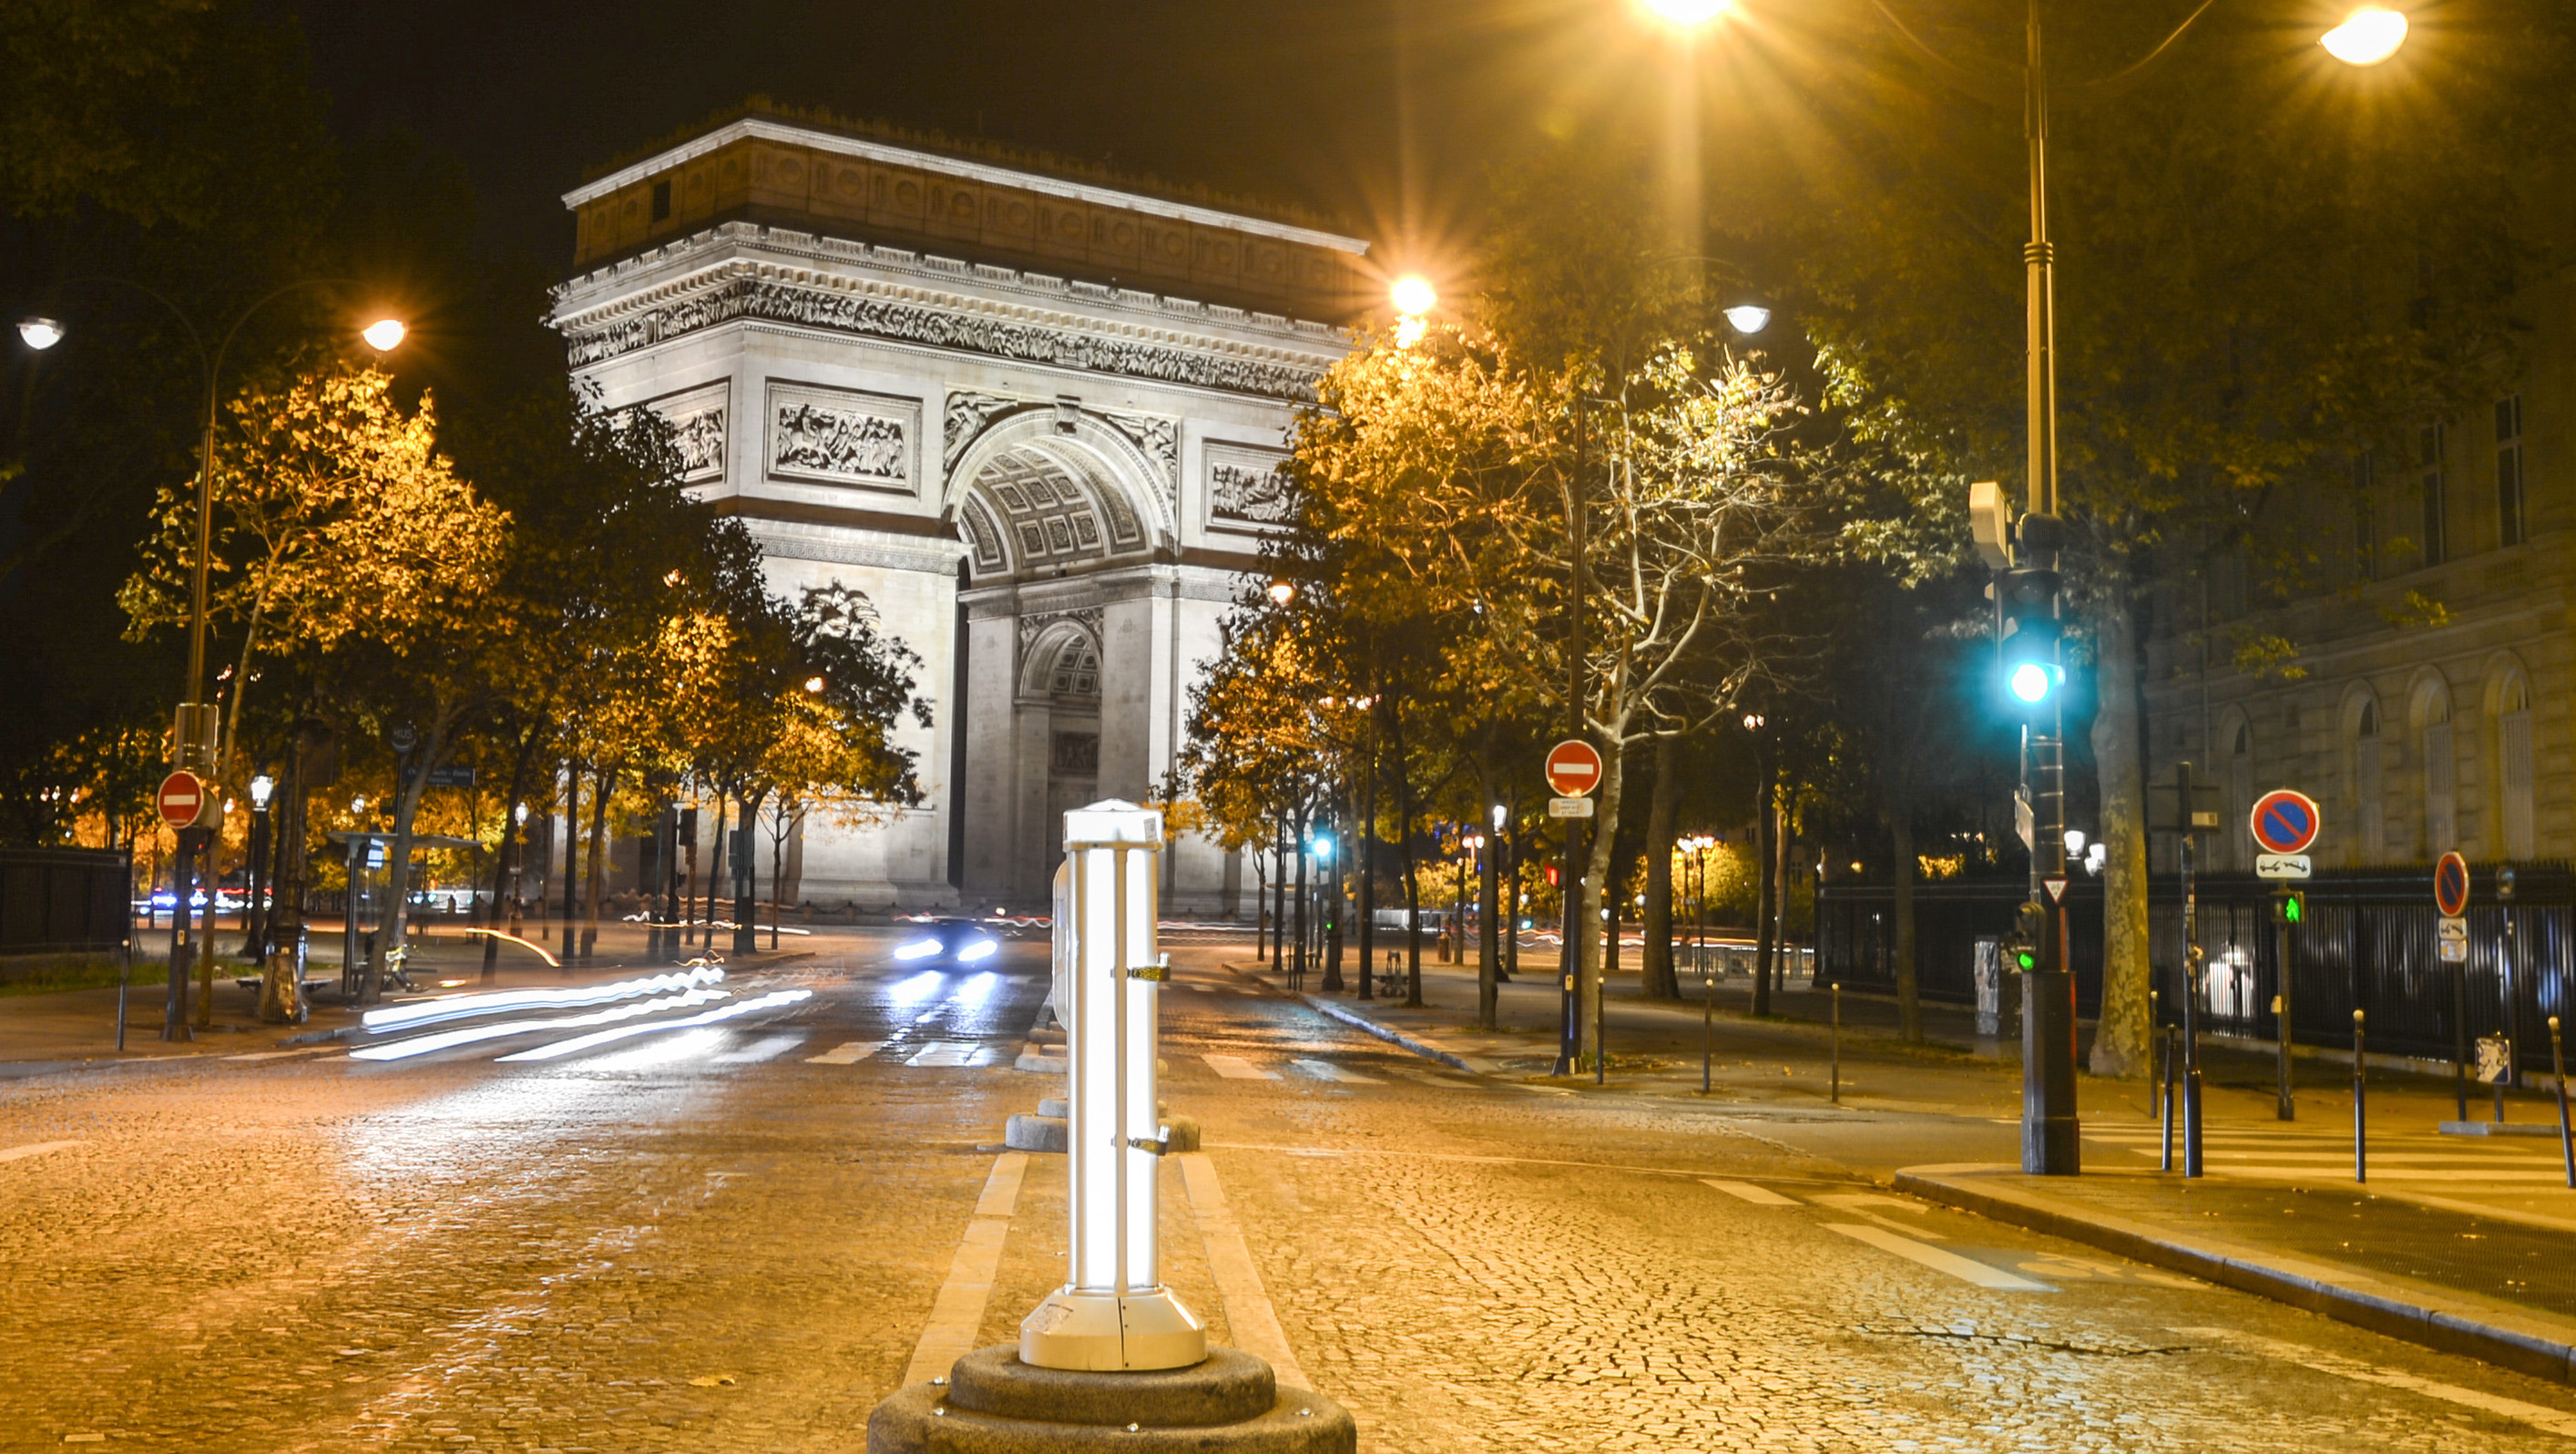 Street View of Champs-Elysees Avenue with Lots of Plane Trees in